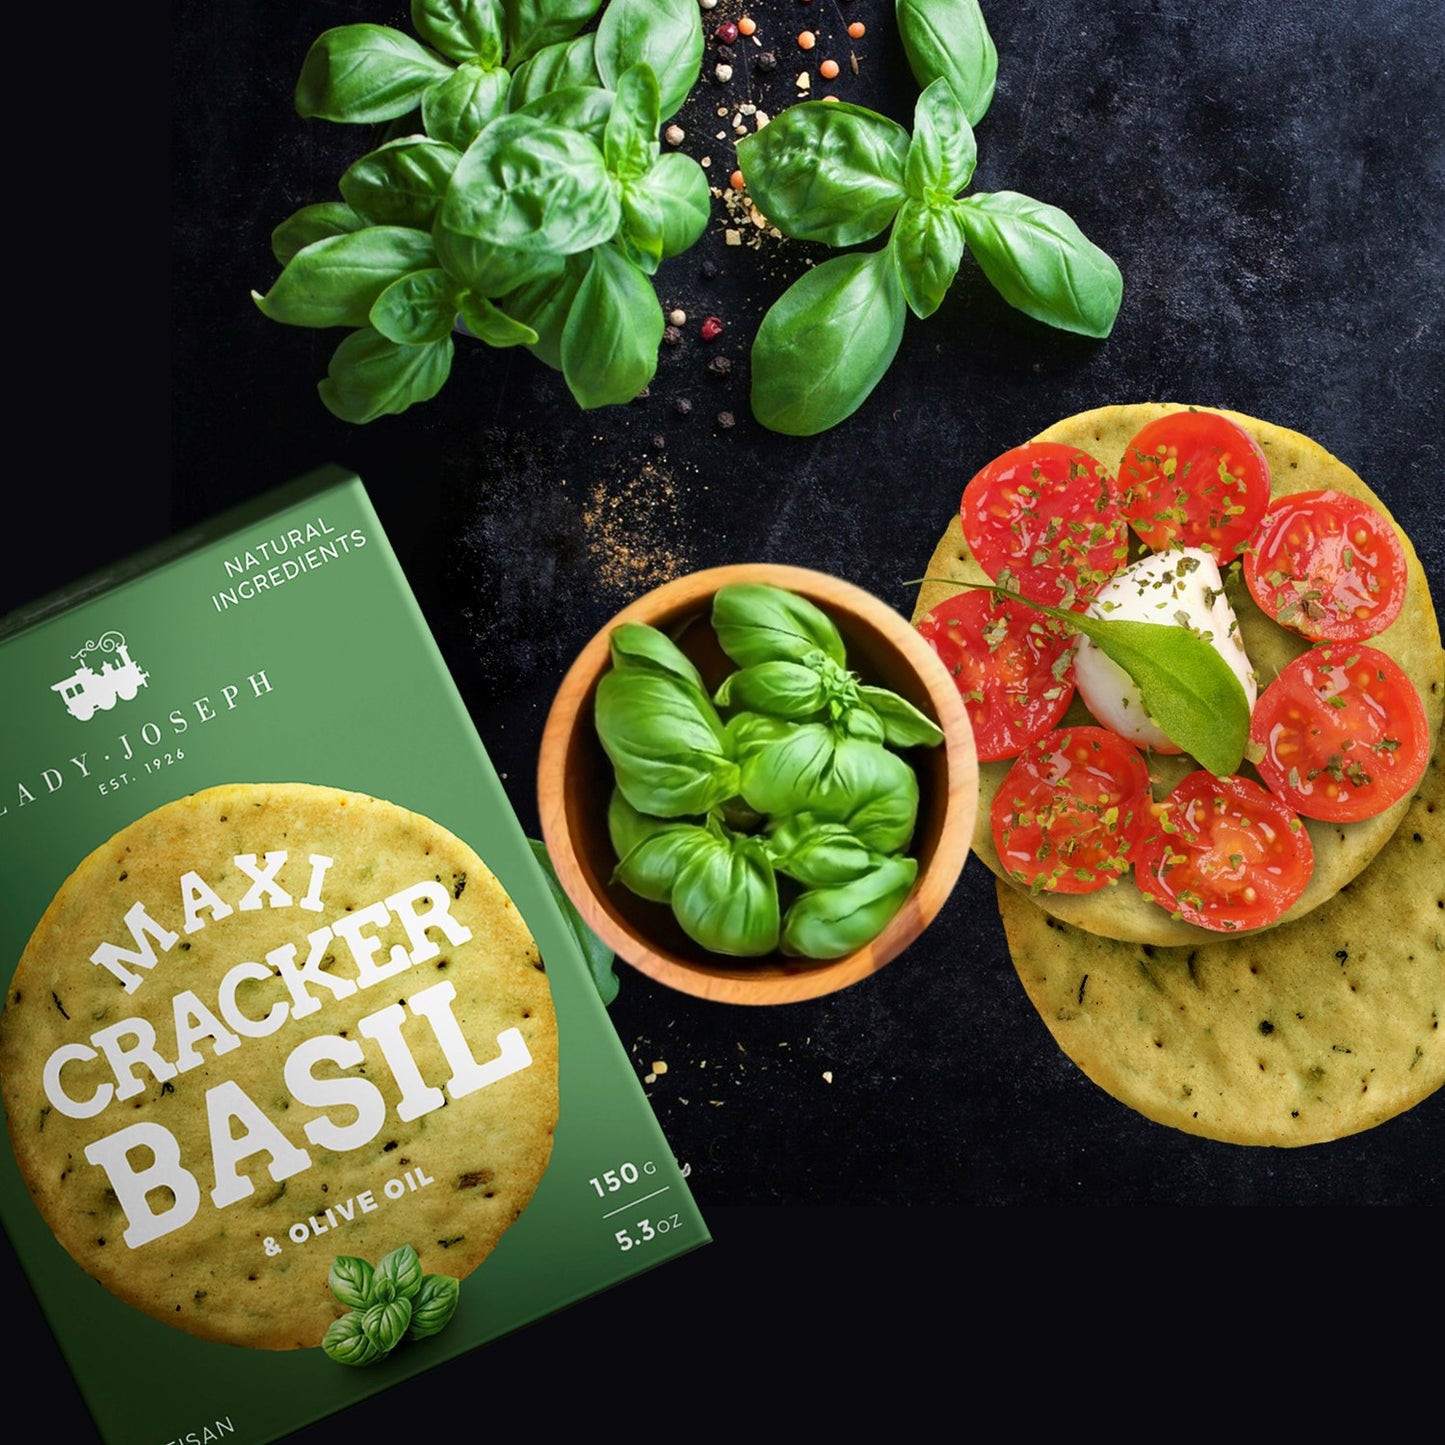 Basil and olive oil Maxi Cracker